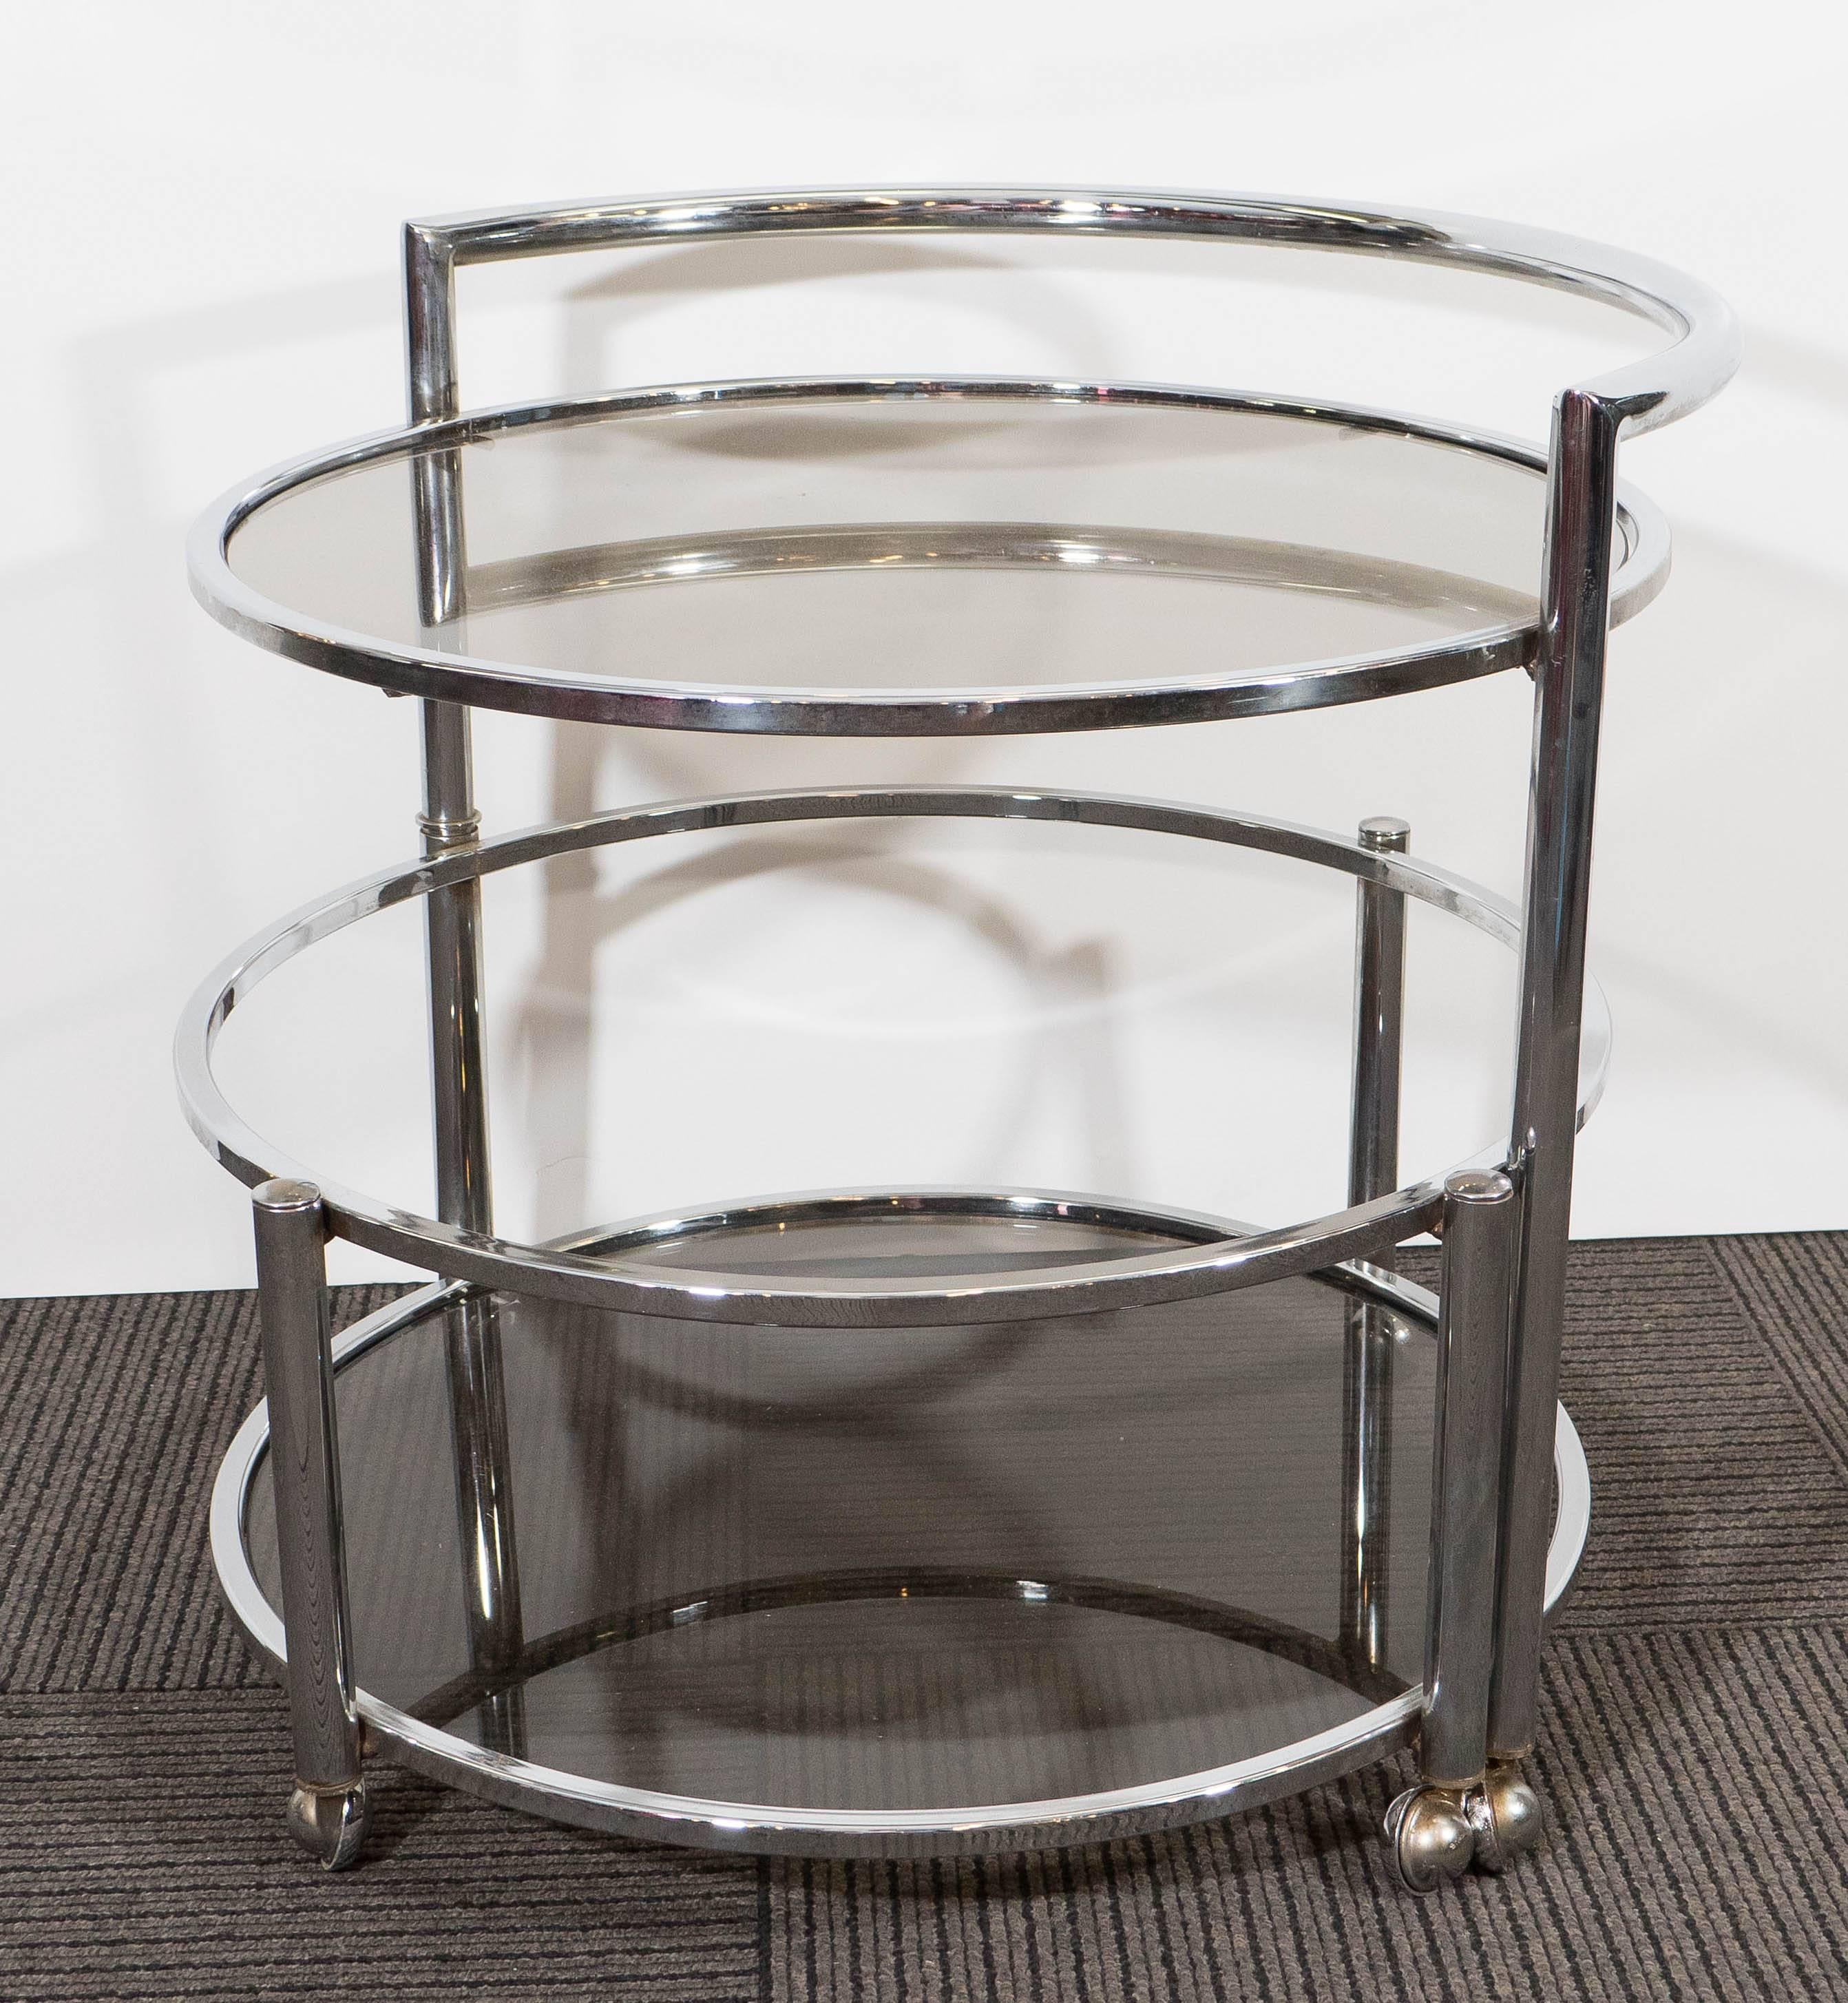 Mid-Century Modern Midcentury Adjustable Round Occasional Table in Chrome & Smoked Glass on Casters